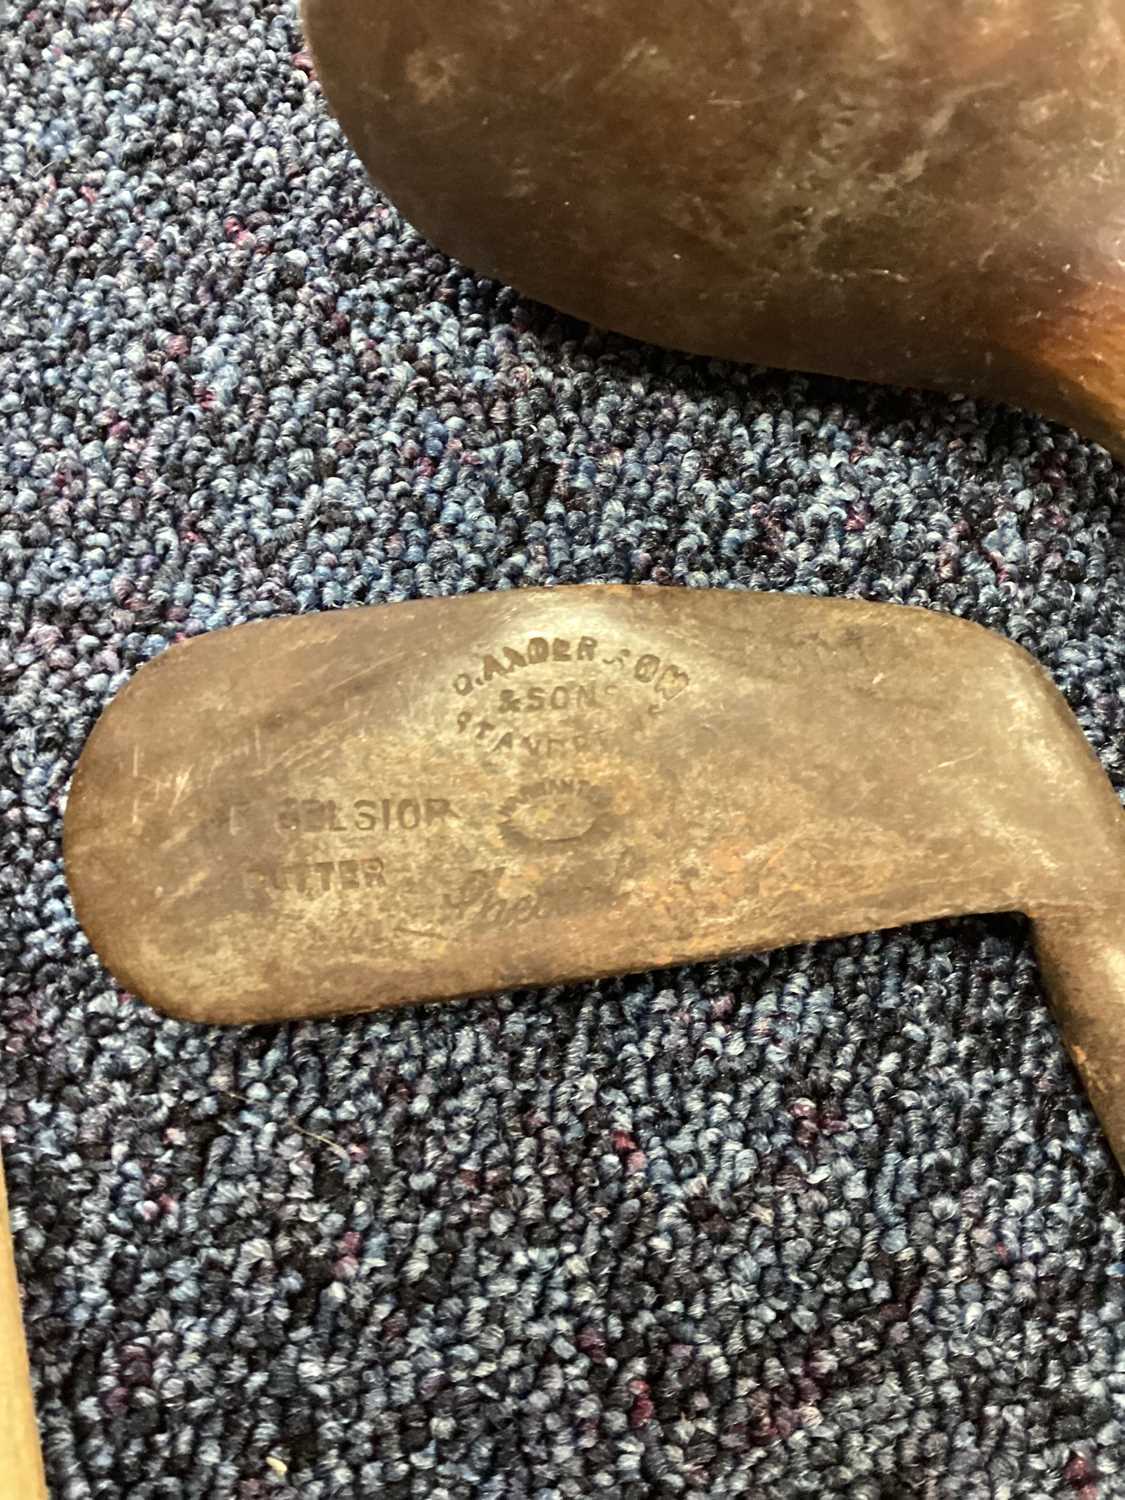 COLLECTION OF TEN HICKORY SHAFTED GOLF CLUBS LATE 19TH/EARLY 20TH CENTURY - Image 7 of 8